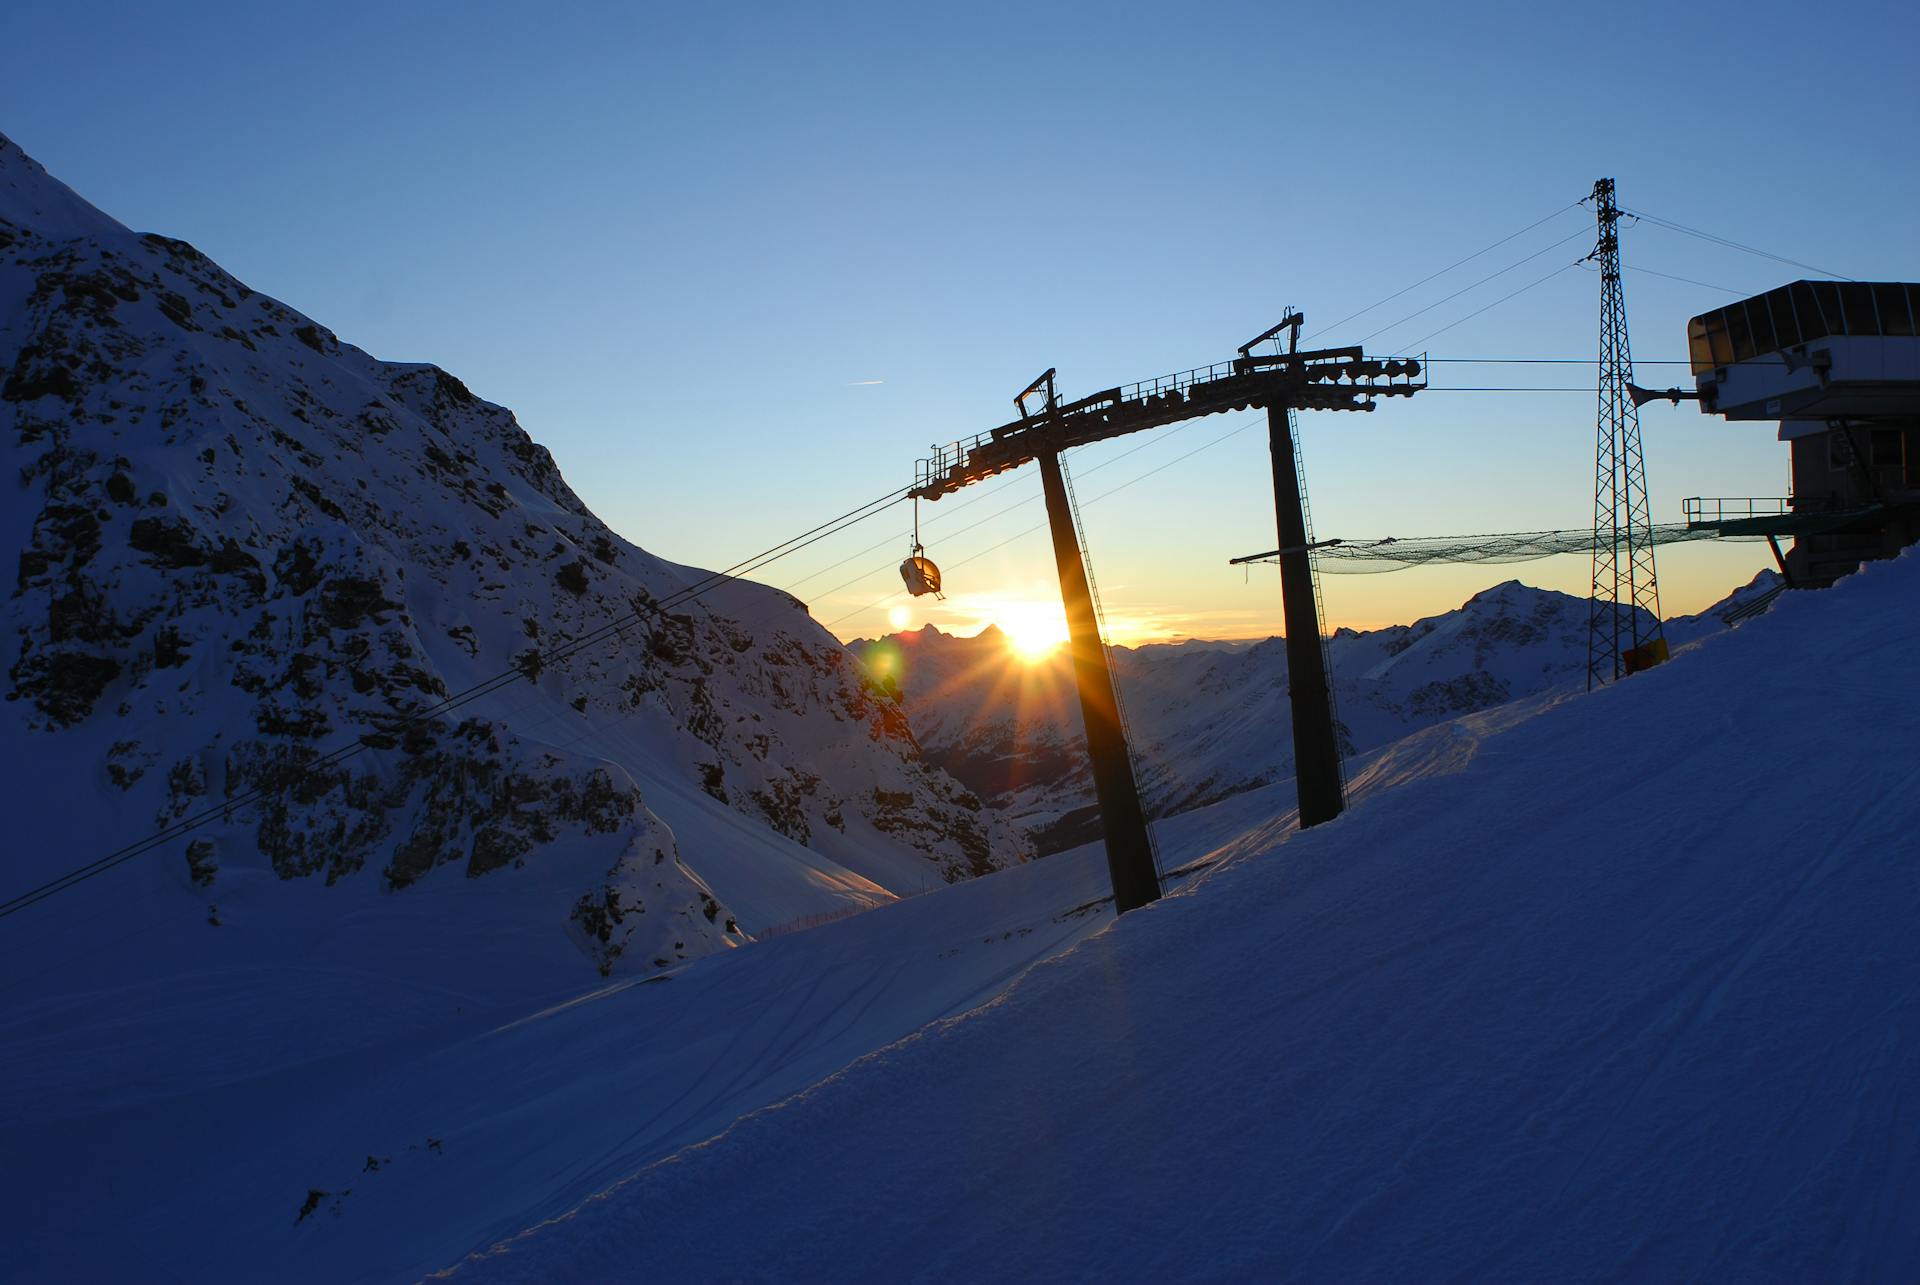 Chairlift transporting skiers to top of Italian mountain ski slope at sunset